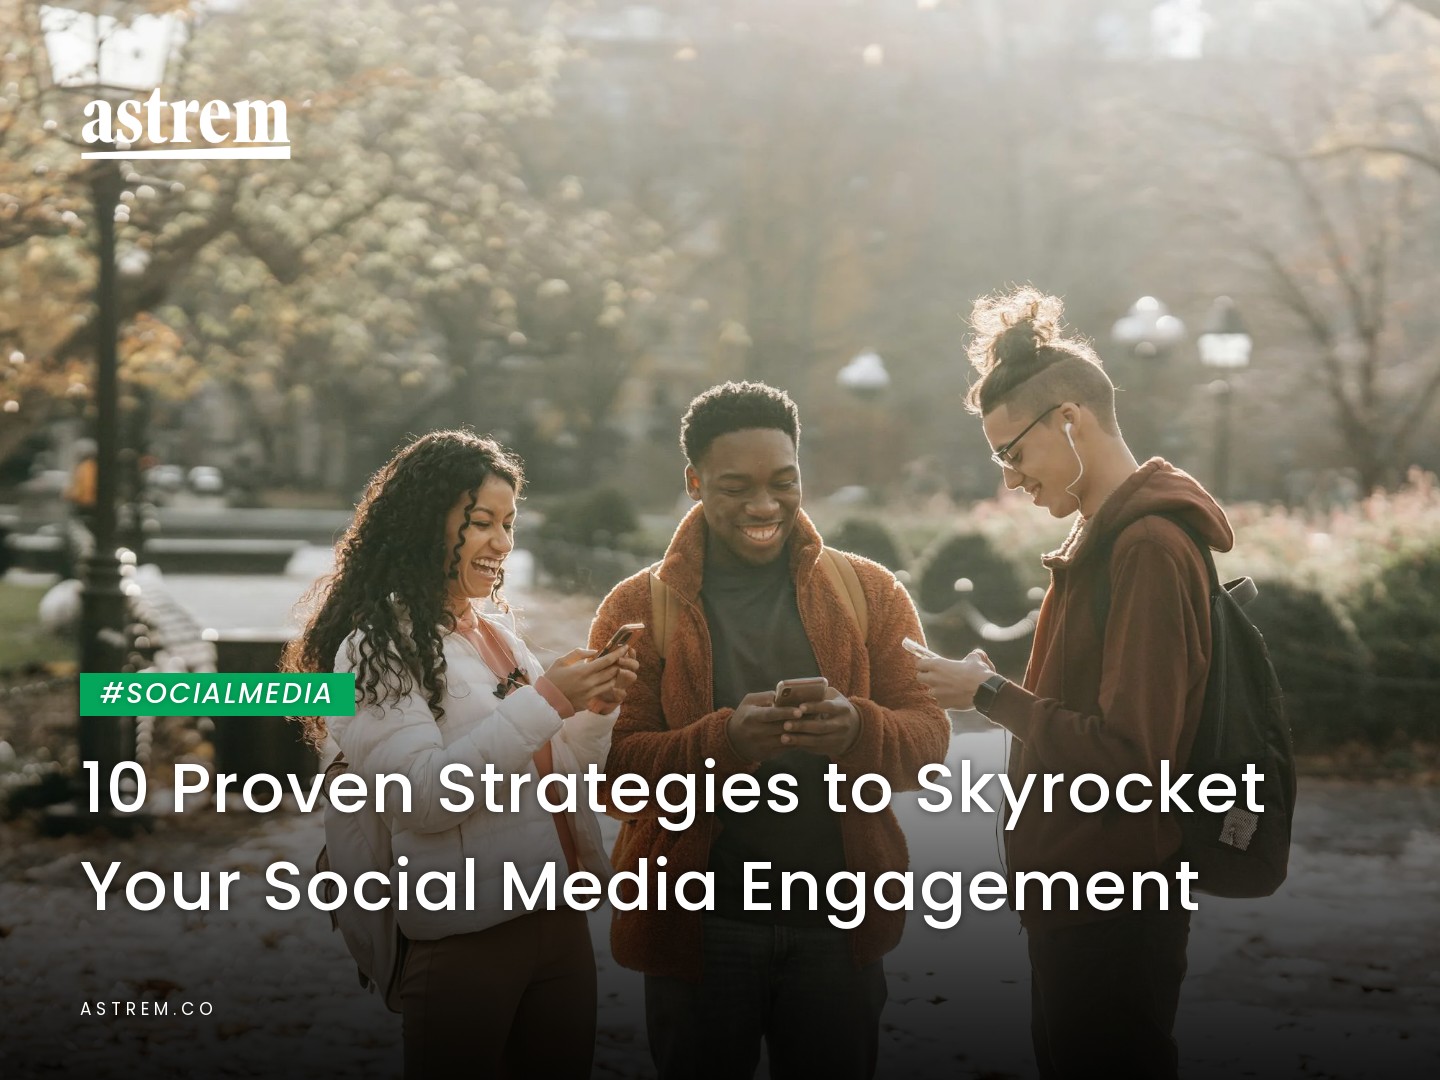 10 Proven Strategies to Skyrocket Your Social Media Engagement Image